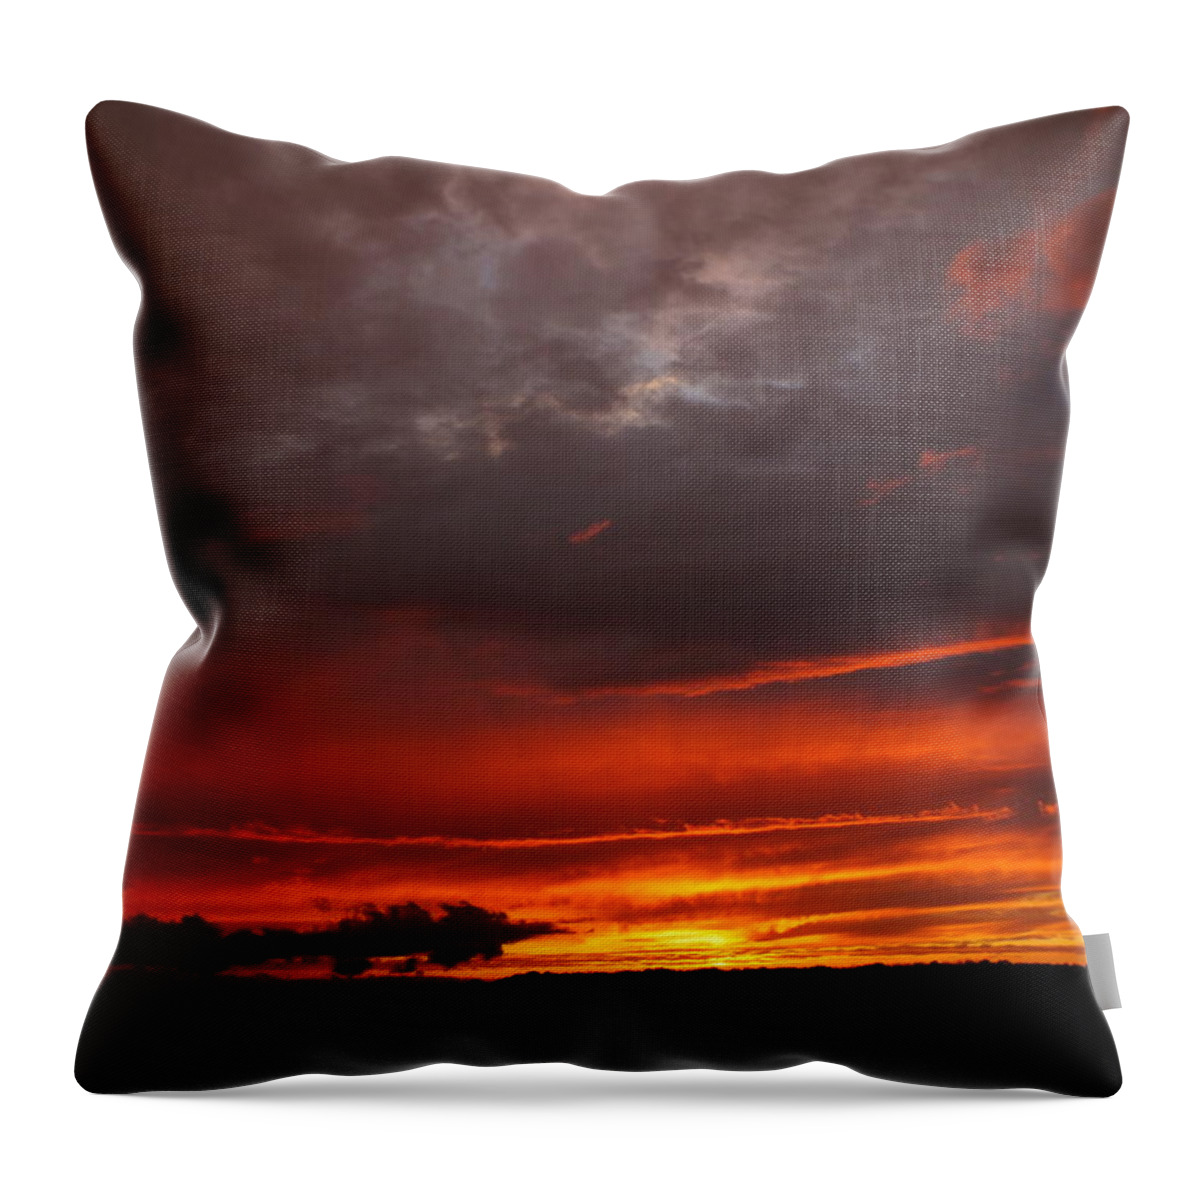 Sunset Throw Pillow featuring the photograph Dragon Fire Sunset by Peggy King